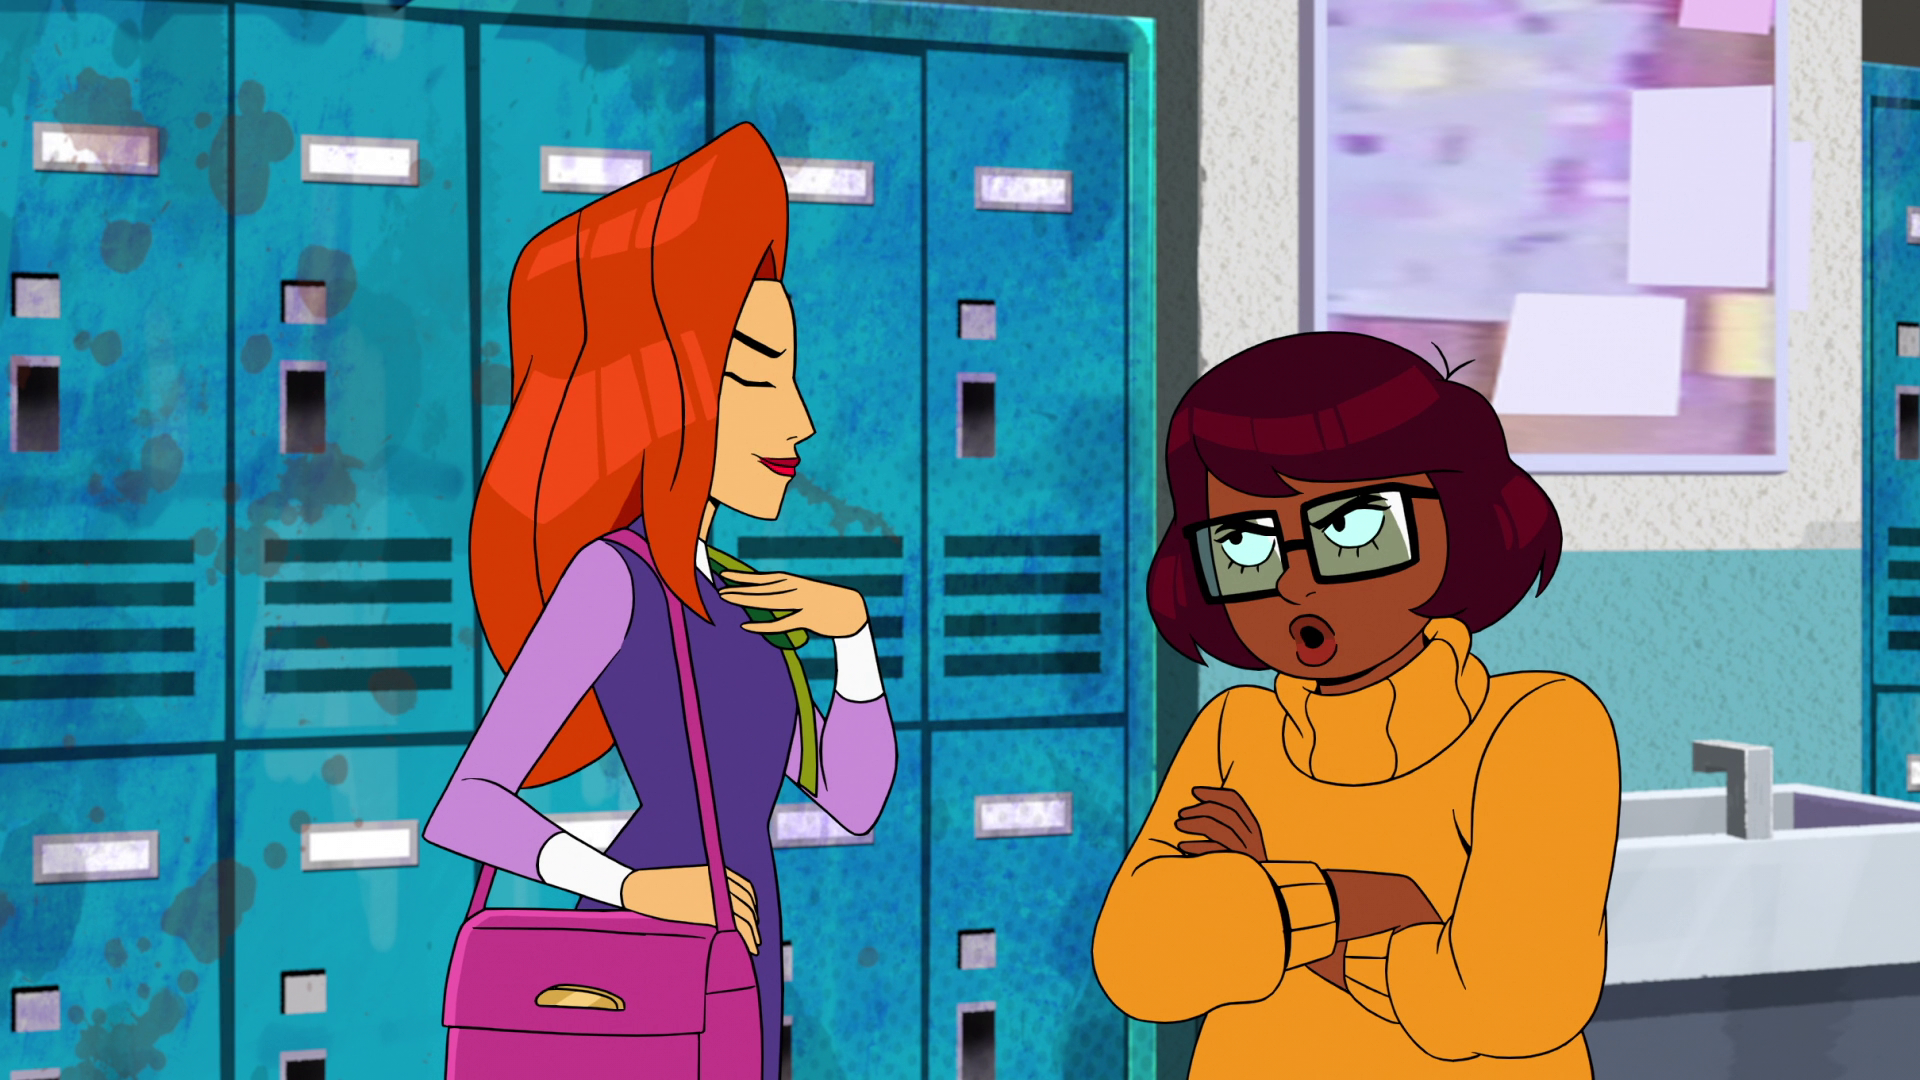 Velma (Mindy Kaling) argues with Daphne (Constance Wu) in Velma Season 1 Episode 2 "The Candy (Wo)Man" (2023), HBO Max